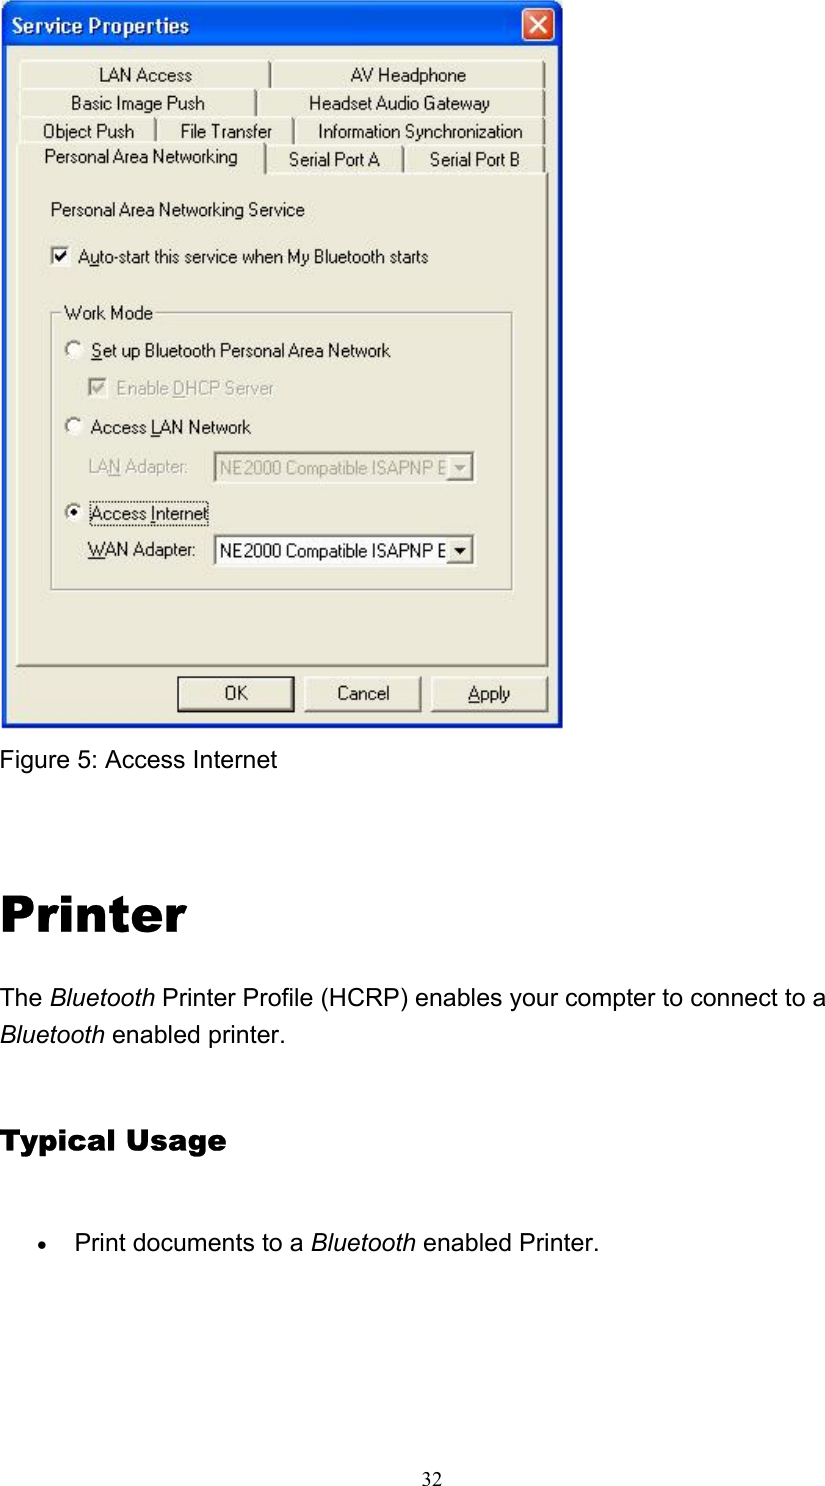   32 Figure 5: Access Internet   Printer The Bluetooth Printer Profile (HCRP) enables your compter to connect to a Bluetooth enabled printer.  Typical Usage • Print documents to a Bluetooth enabled Printer. 